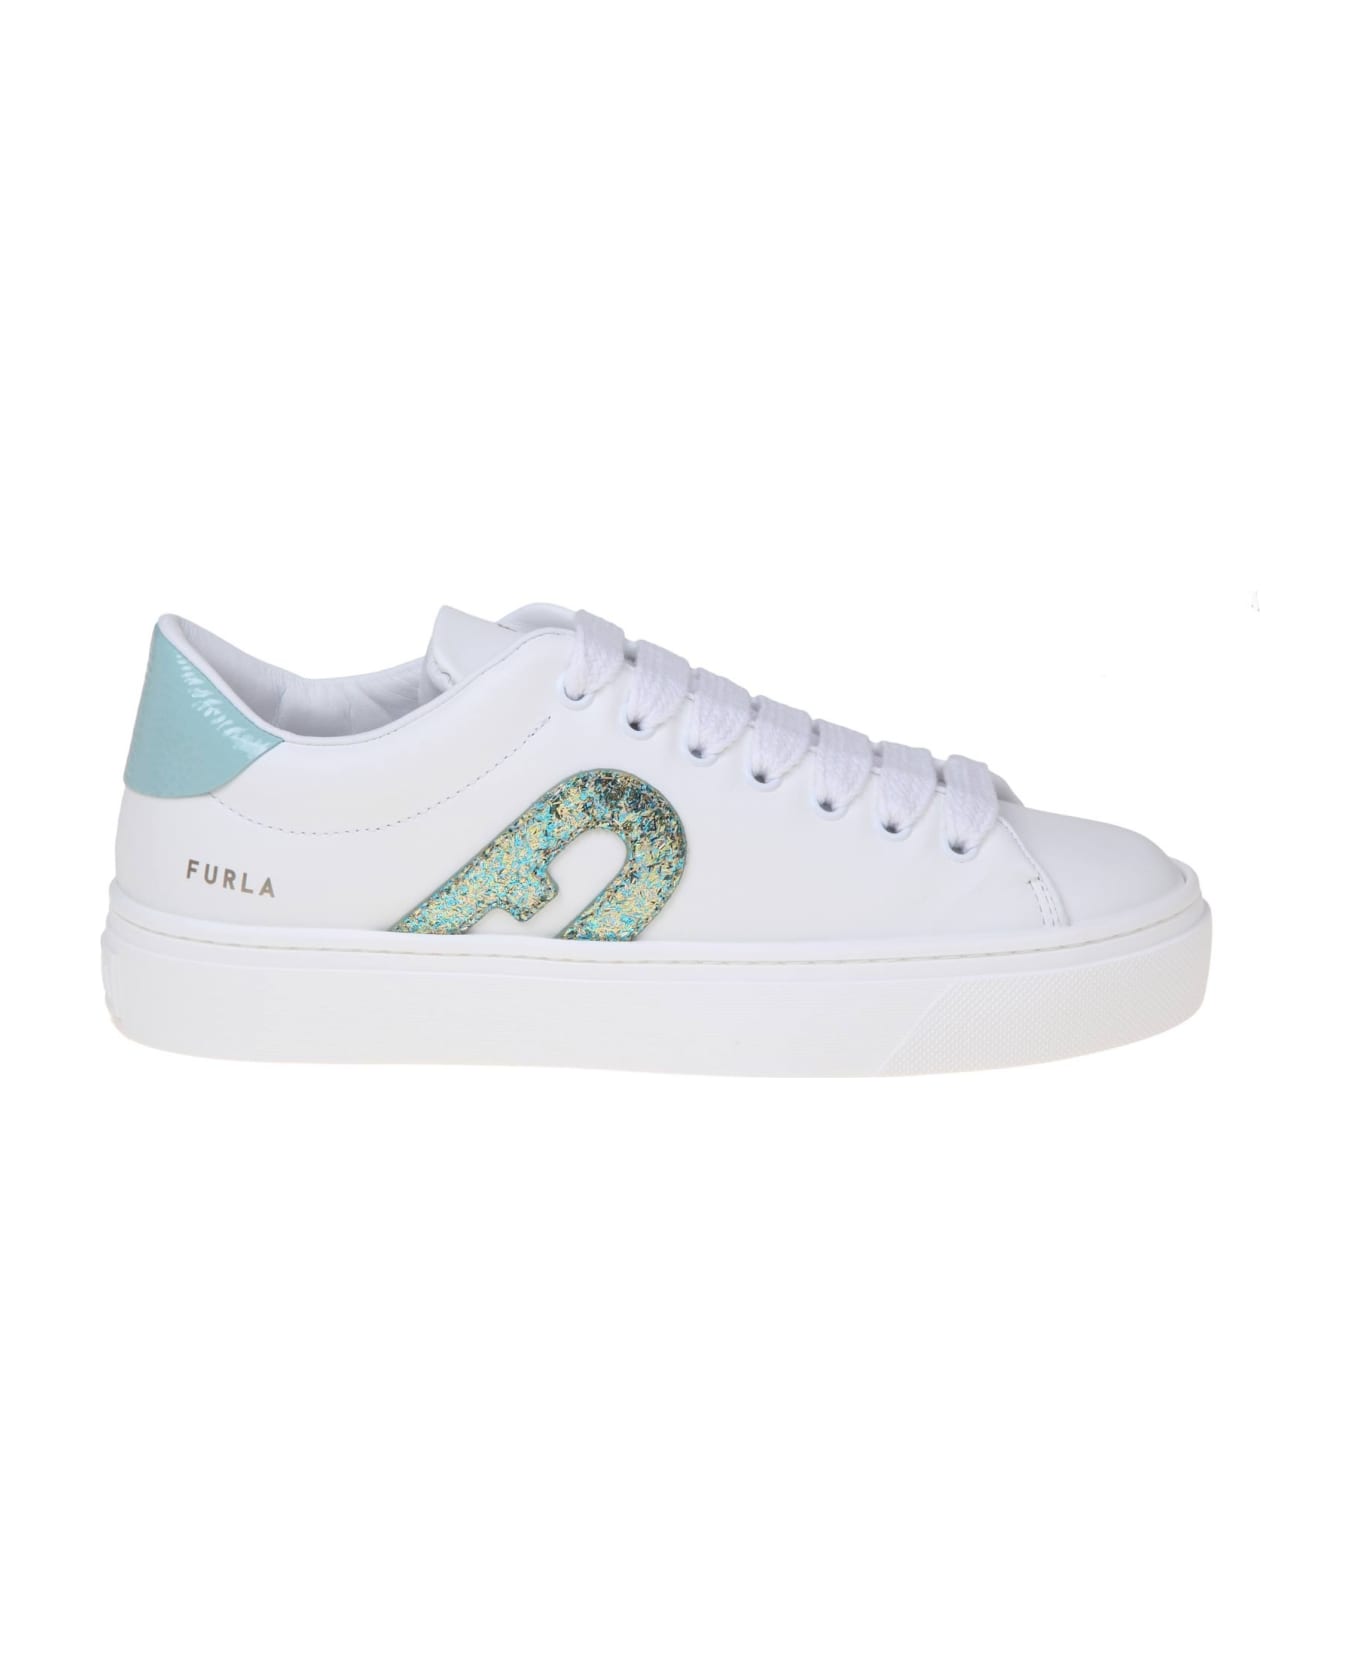 Furla Joy Lace Up Sneakers In White Leather - TALC/VERGOLD スニーカー